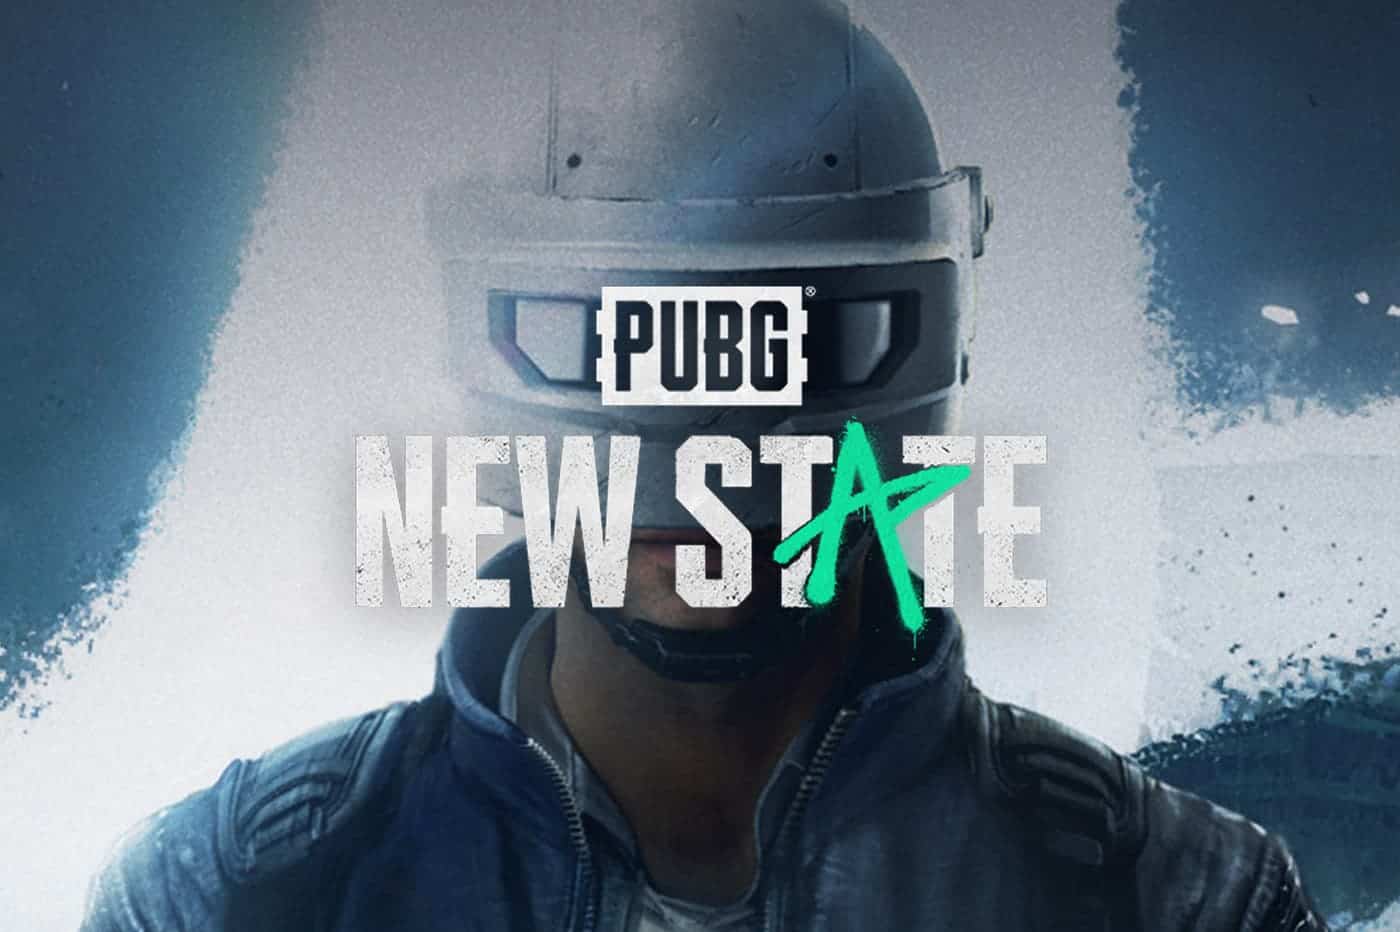 Top 3 features of PUBG New State